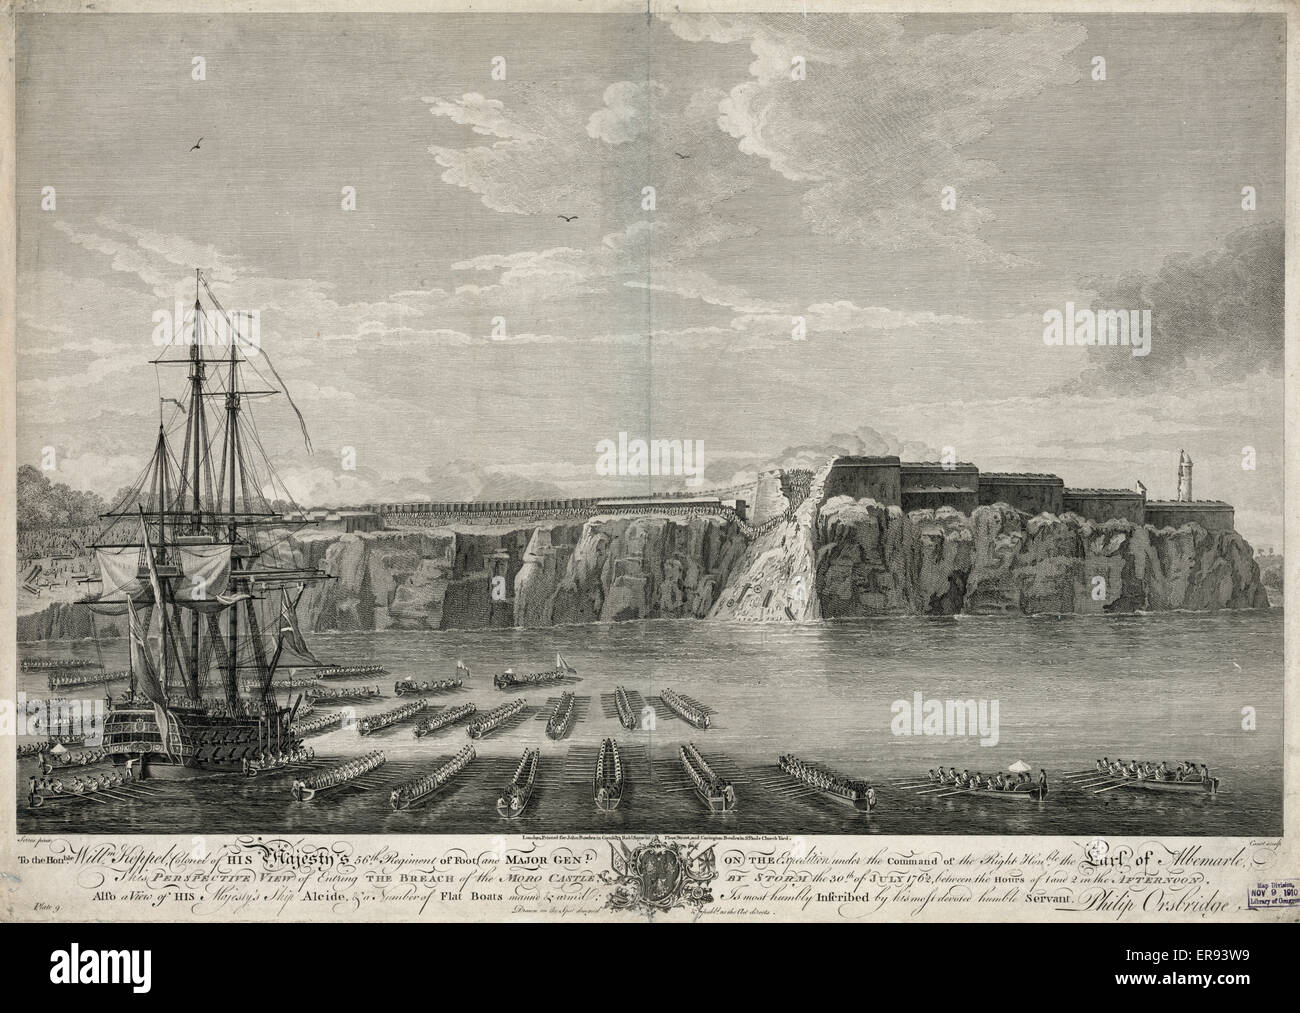 Perspective view of entring the breach of the Moro Castle, by storm the 30th of July 1762,  Print shows Morro Castle in the background with infantry passing through a breach in the walls, and in the foreground, the ship Alcide and numerous long boats with Stock Photo